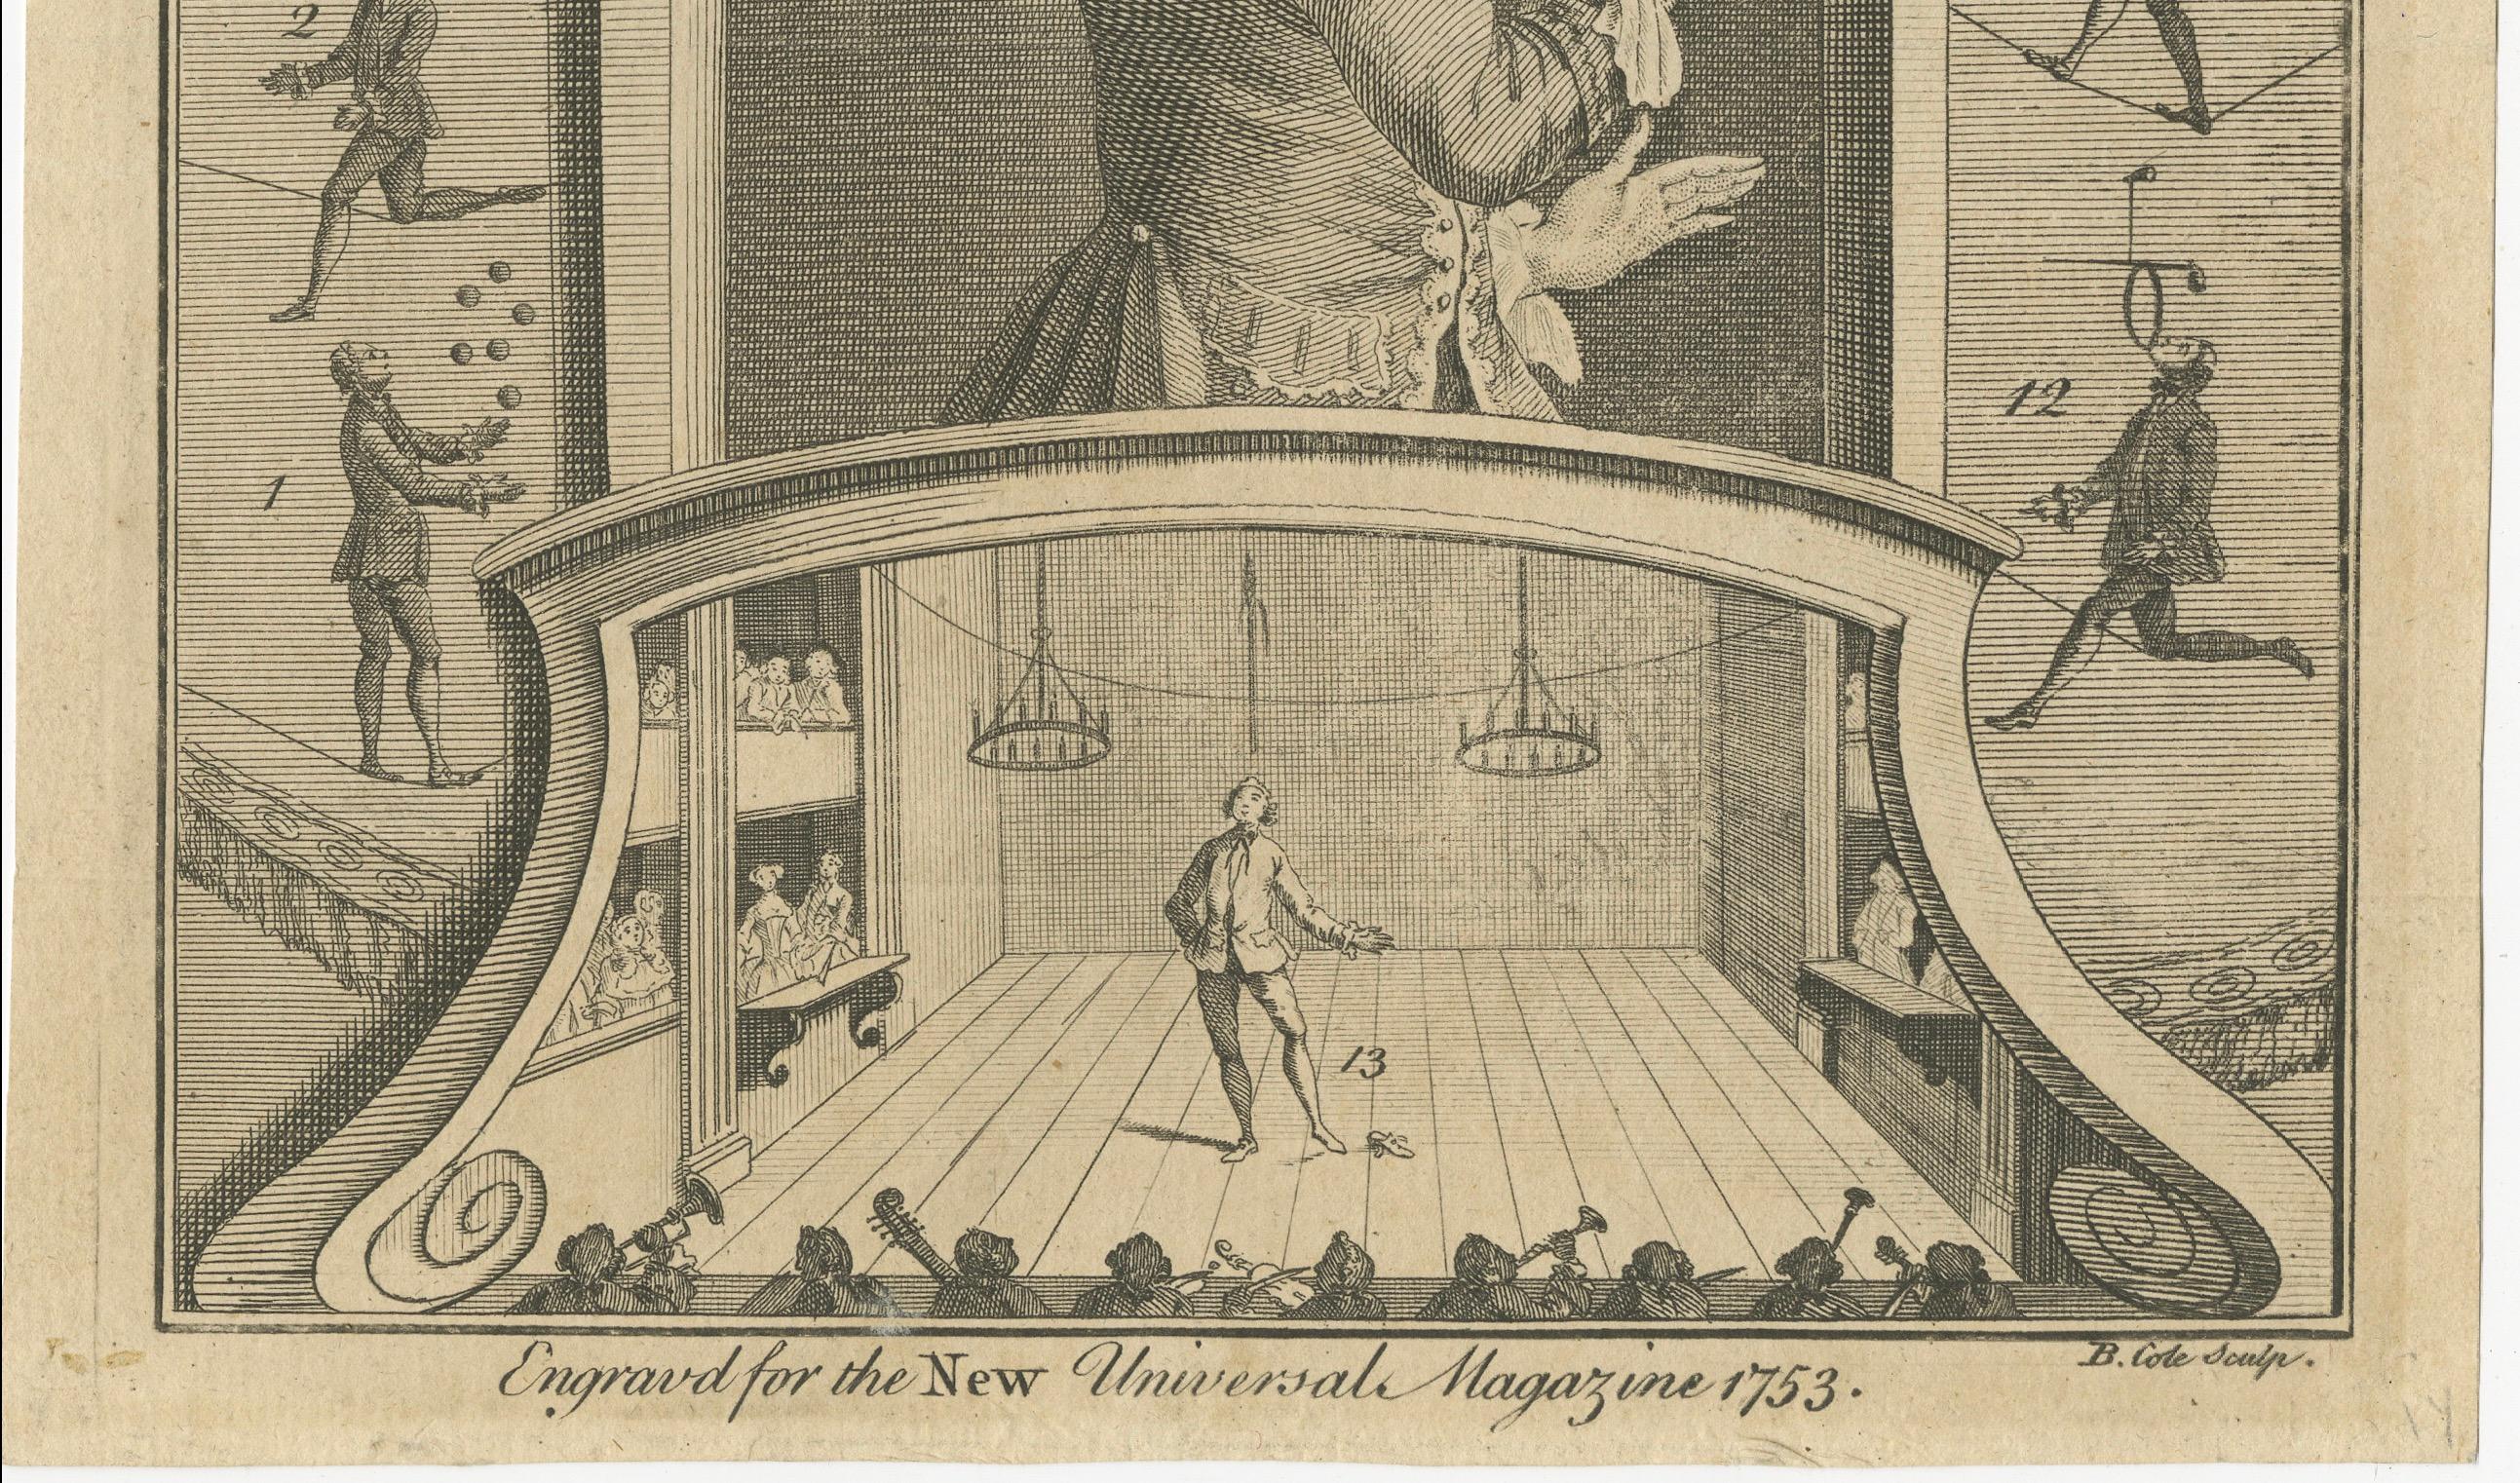 This engraving features Anthony Madox, an English performer known for his dexterity and contortion skills. He was active in the 18th century and was renowned enough to perform before royalty at the New Theatre in Covent Garden. The image appears to